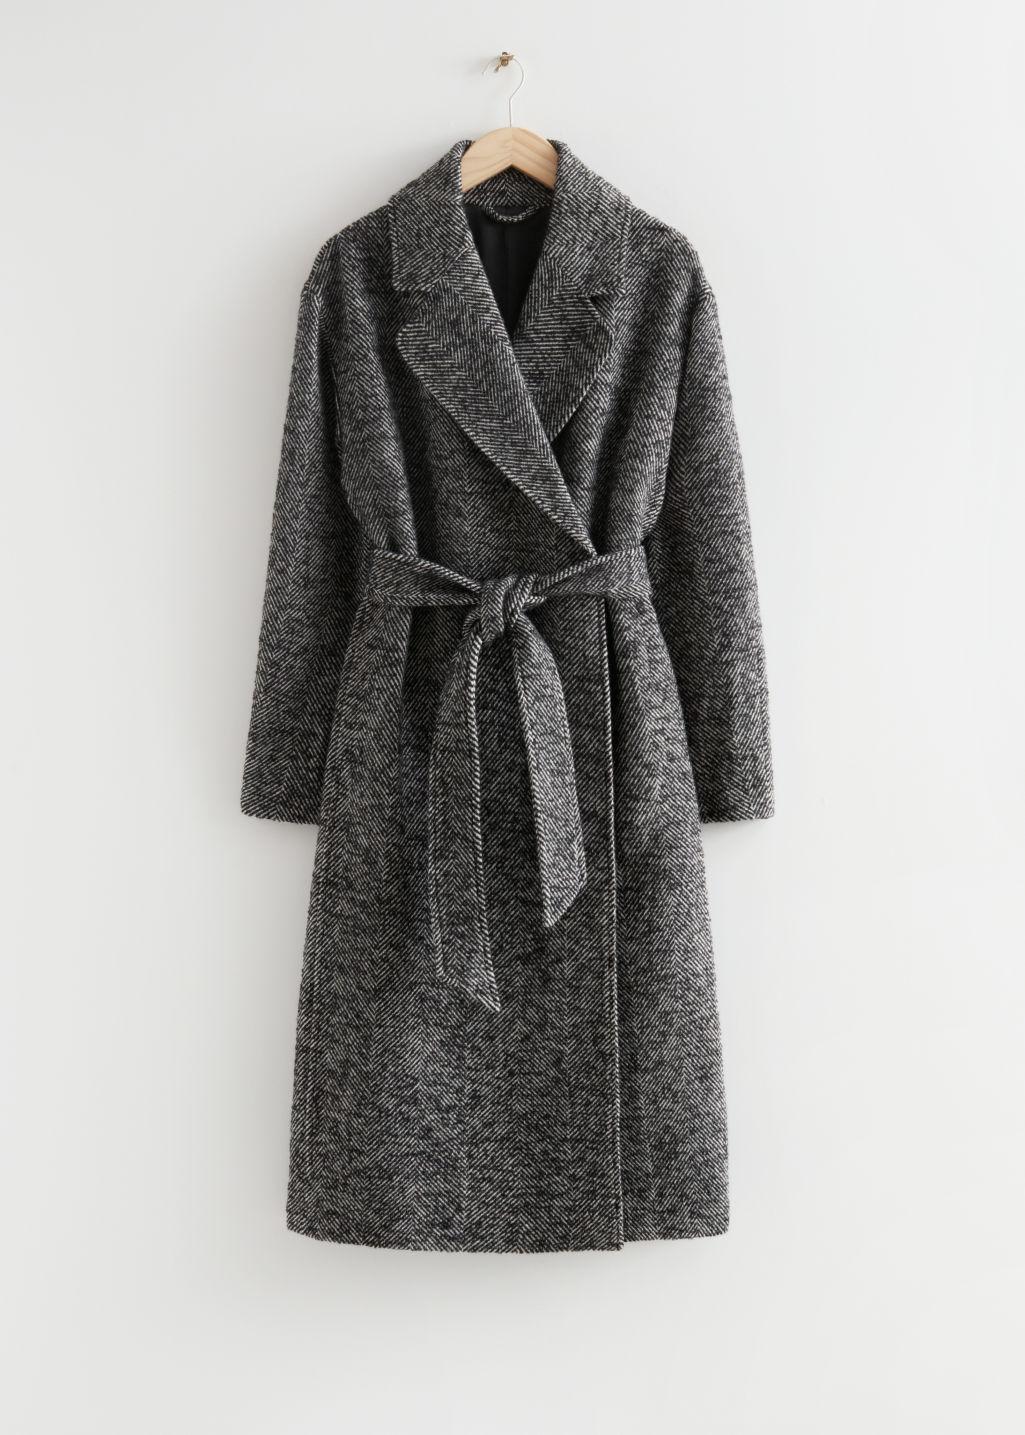 & Other Stories Voluminous Belted Wool Coat in Black (Gray) | Lyst